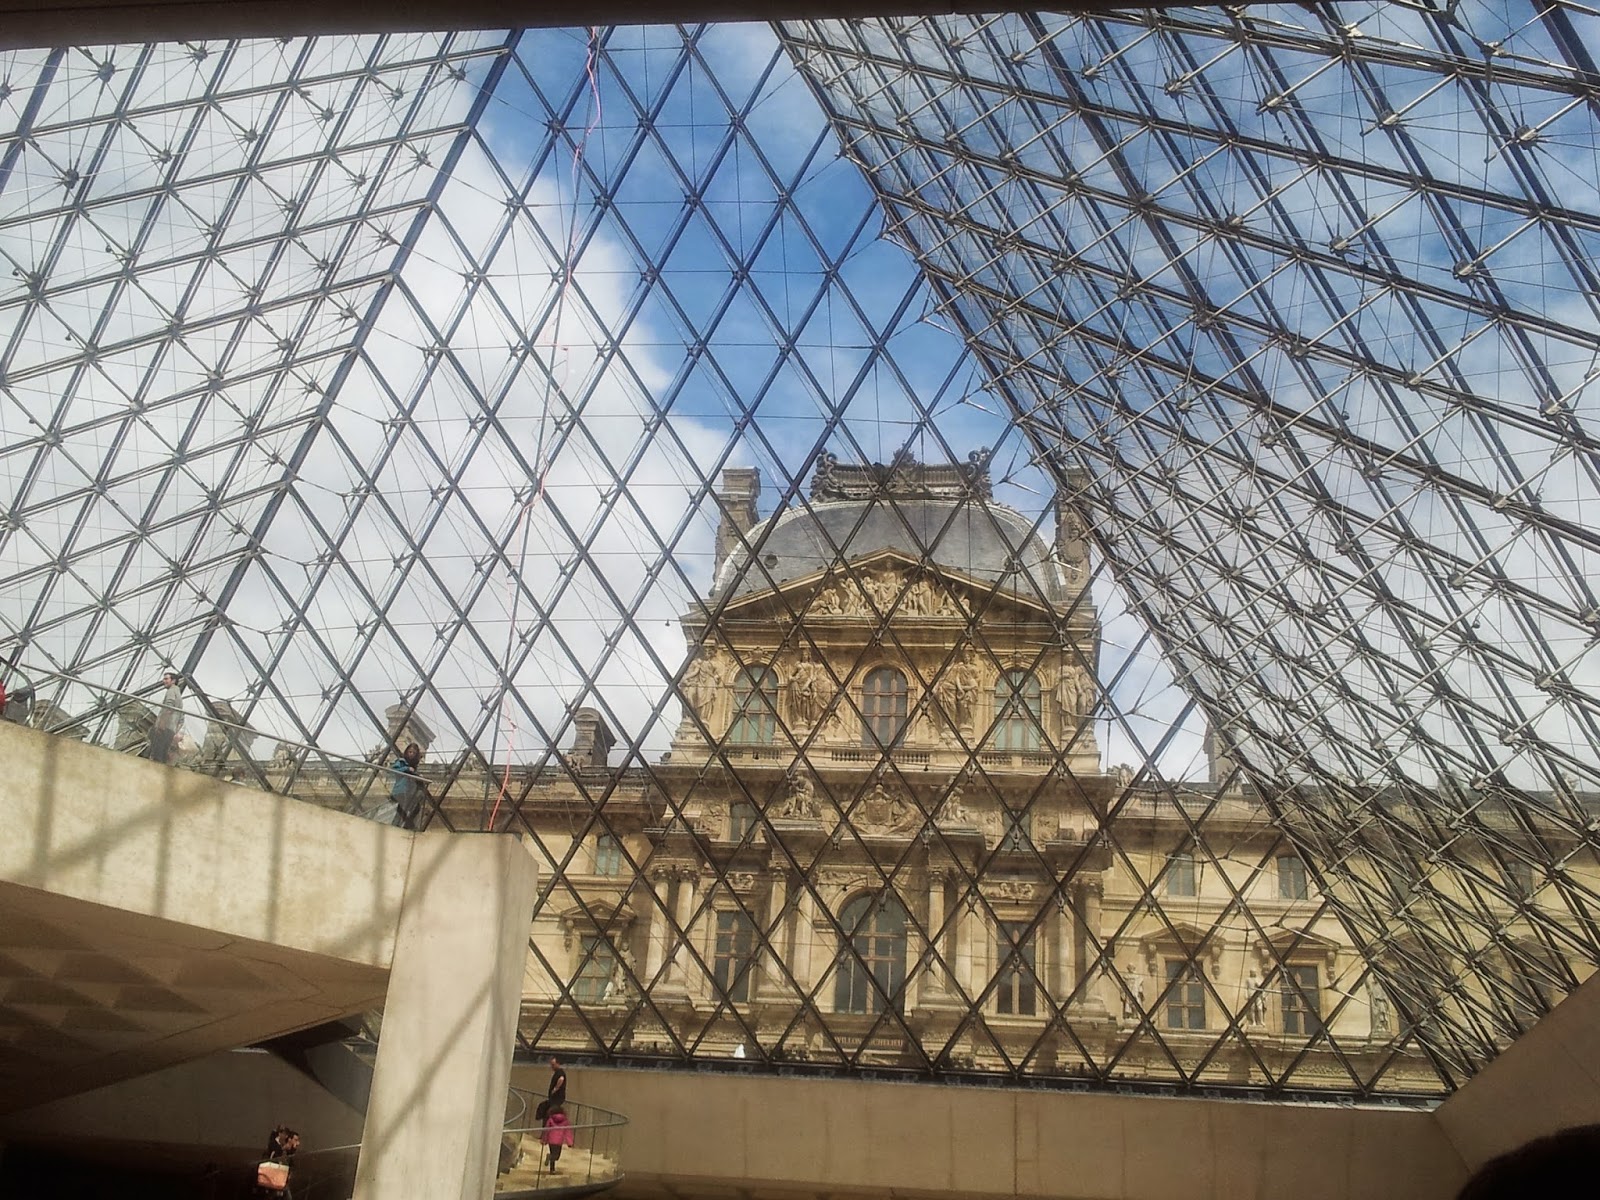 Looking out under the glass at the Louvre, Paris.